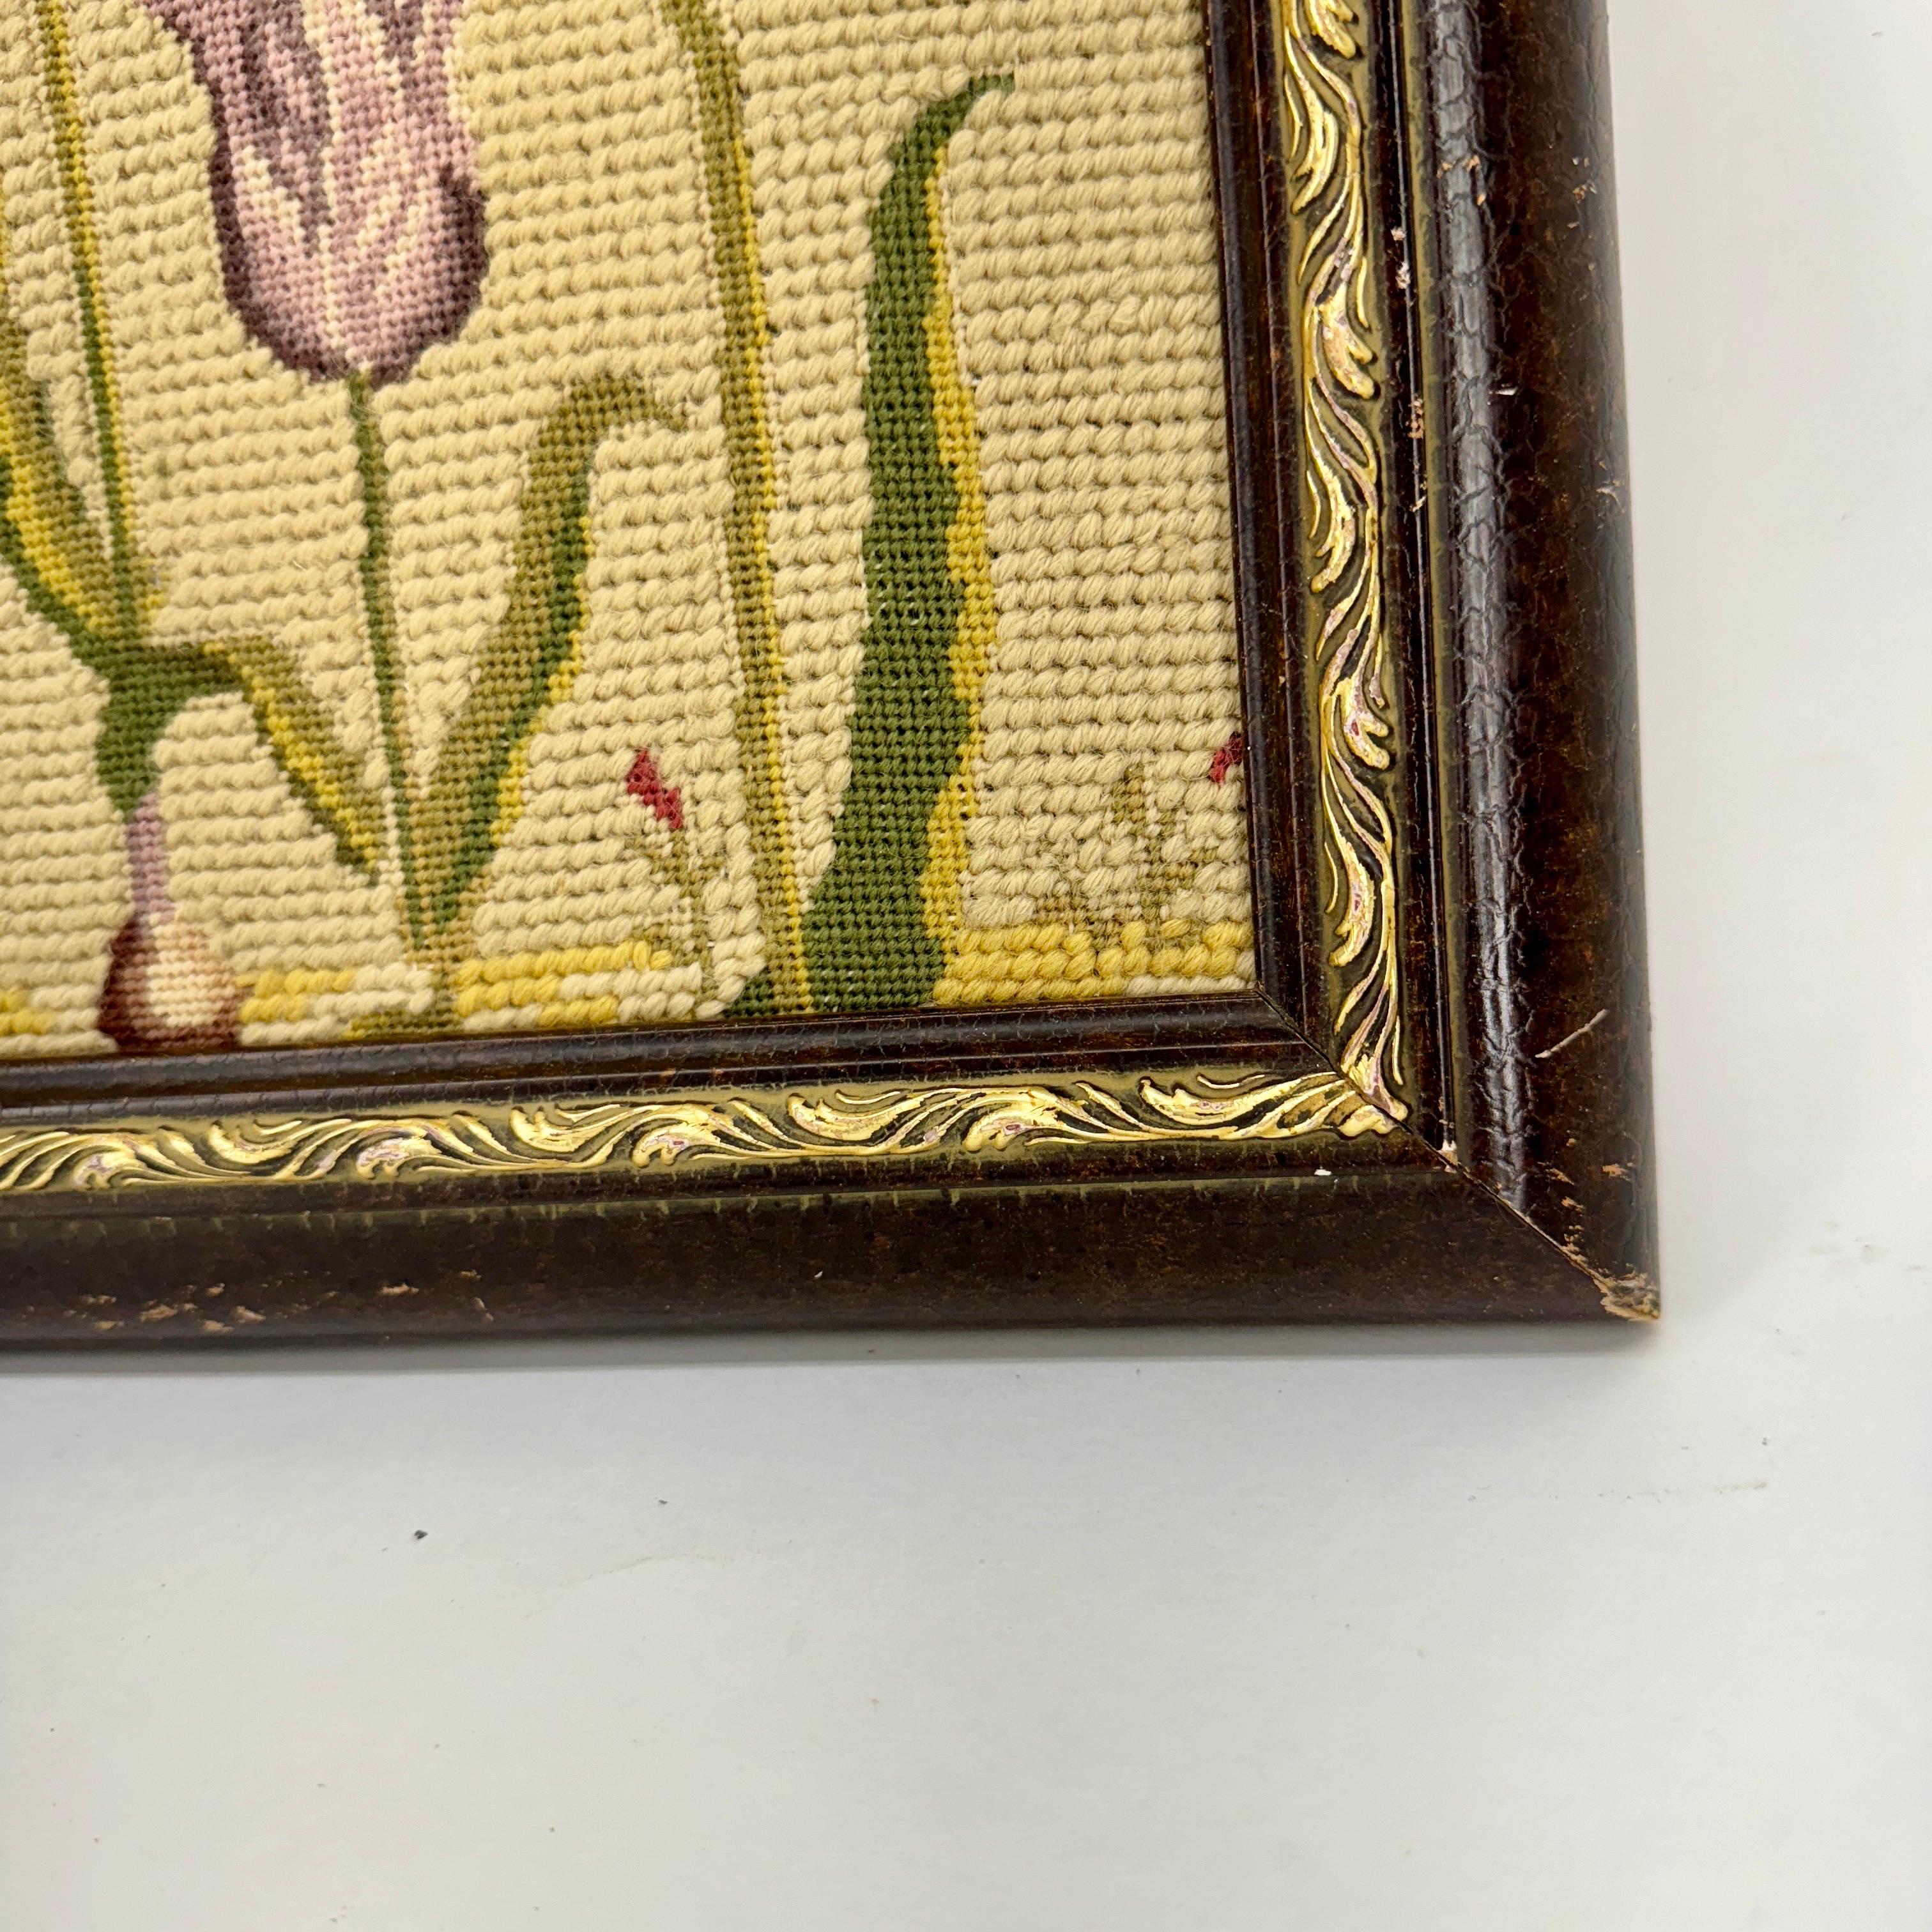 Chelsea Textiles Original Needlepoint Tulip Artwork In Red White and Yellow In Good Condition For Sale In Haddonfield, NJ